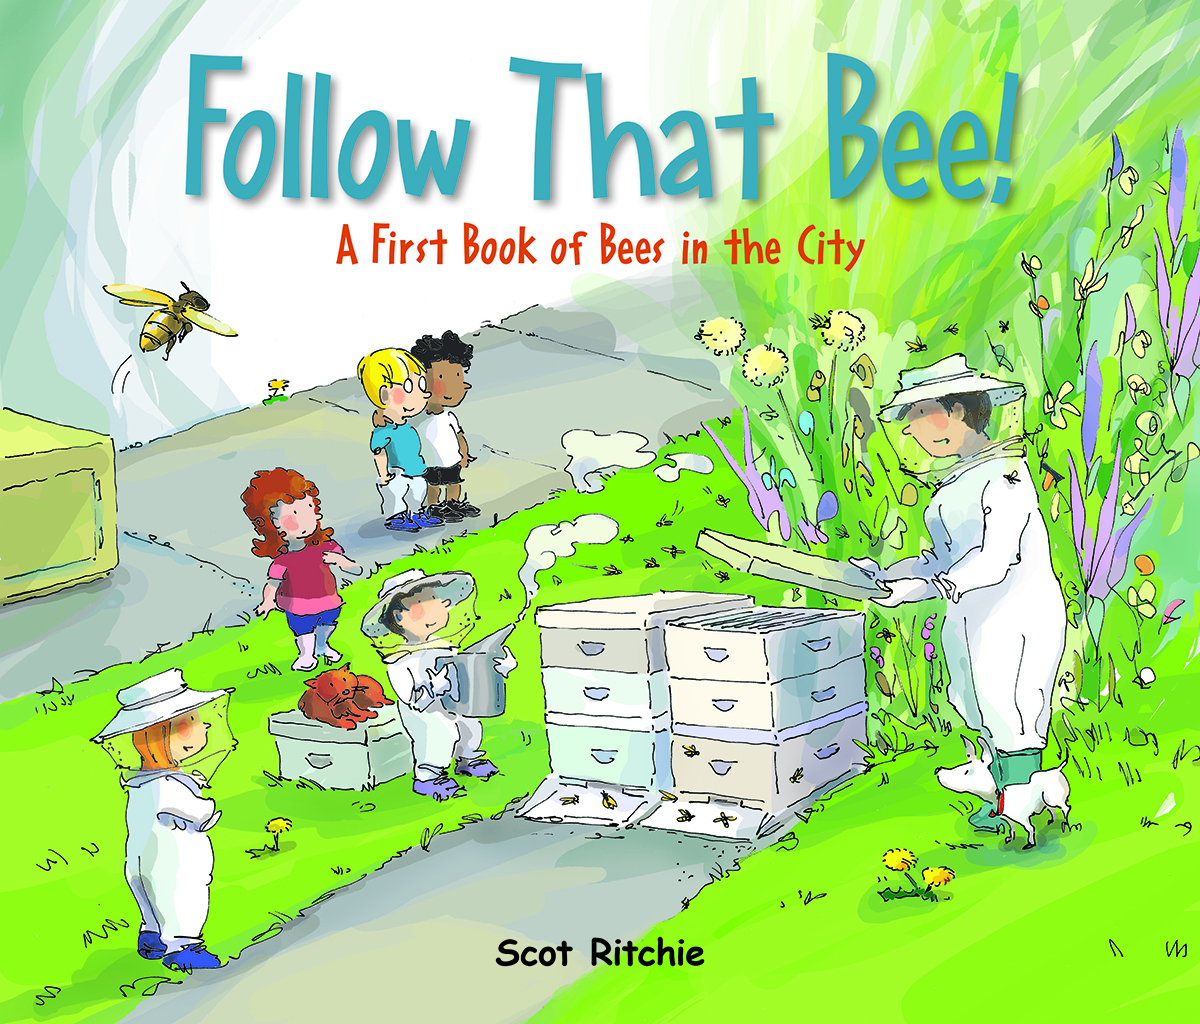   Follow That Bee!: A First Book of Bees in the City